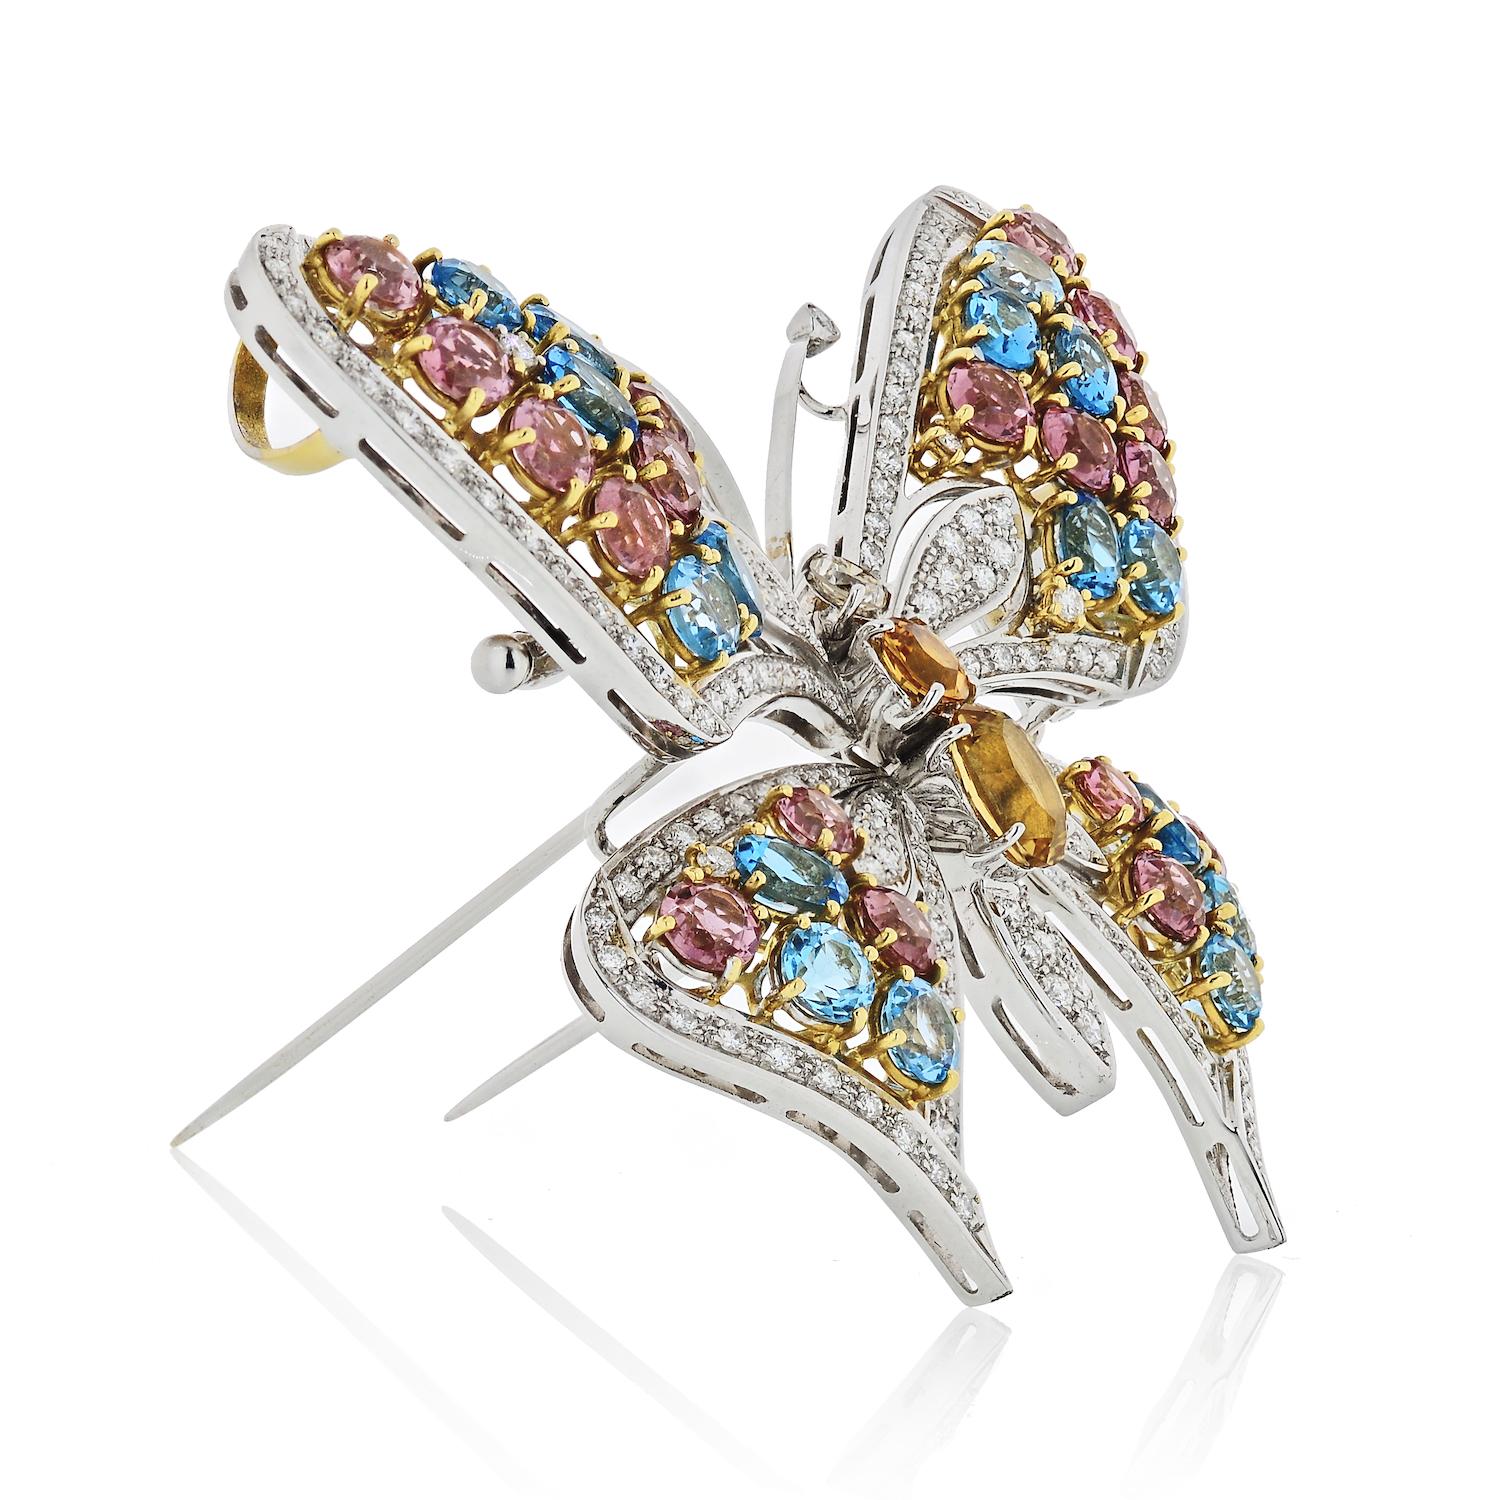 Multicolored gemstone and diamond brooch in the form of a butterfly, with the wings set with diamonds and multicolor gemstones. Total diamond weight estimated 4 carats, total gemstone weight estimated 10 carats, to a white gold mount. Made in